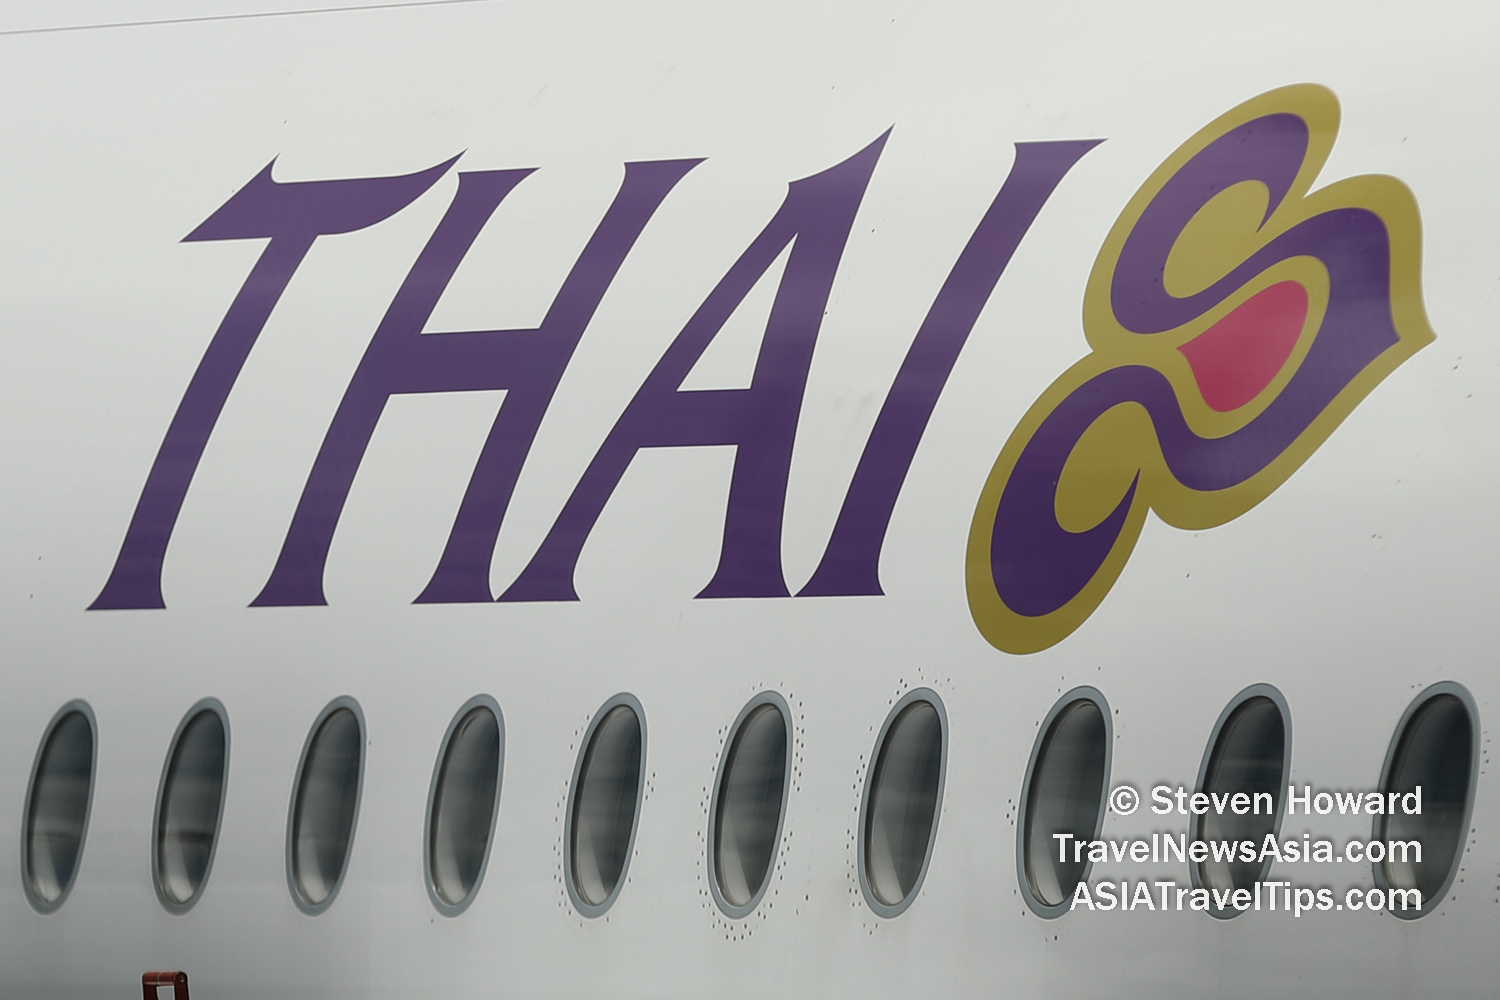 Thai Airways logo on an Airbus A350-900. Picture by Steven Howard of TravelNewsAsia.com Click to enlarge.